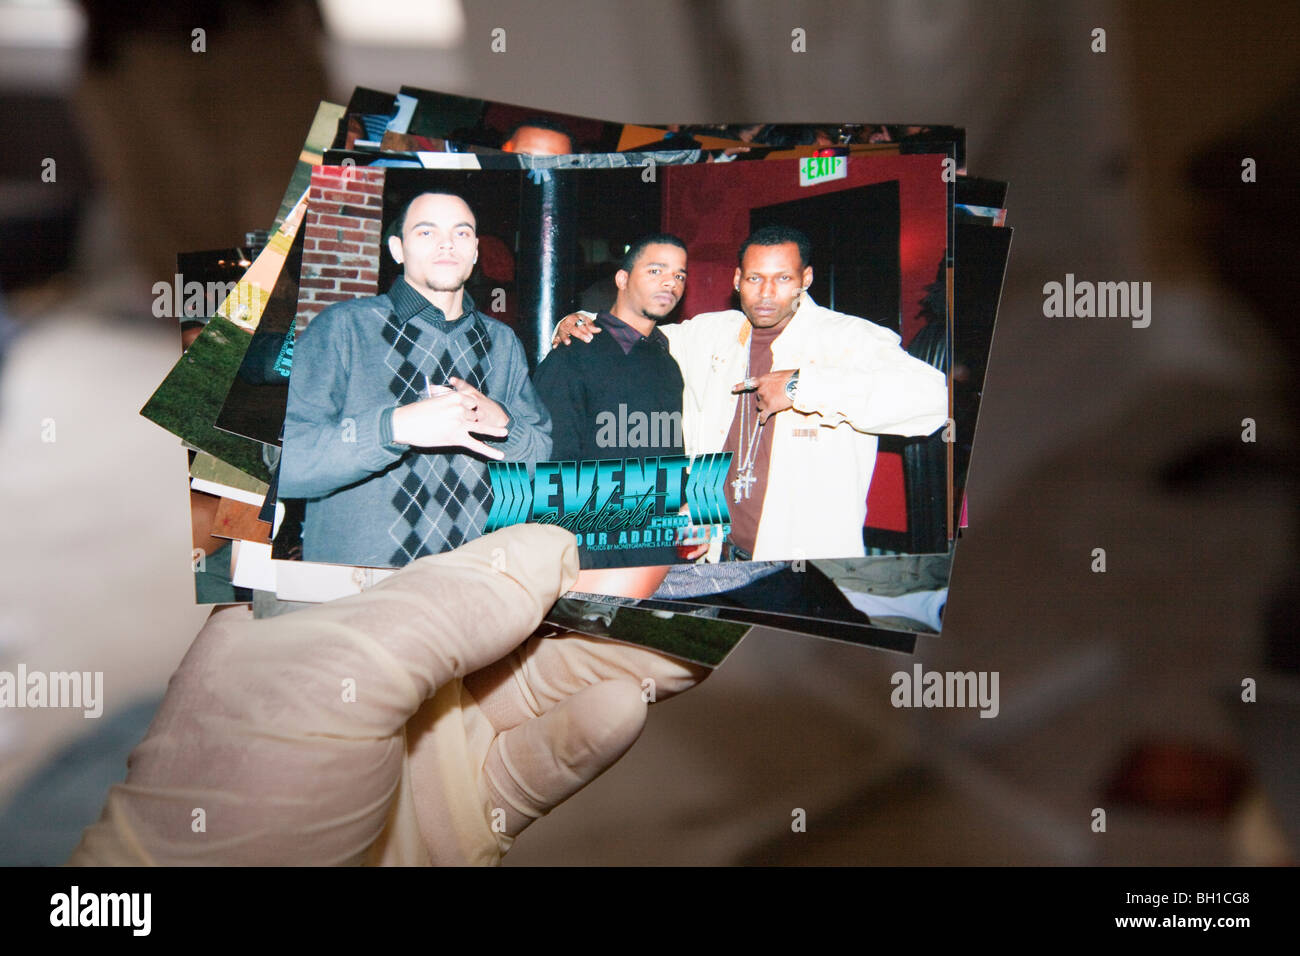 Photos located during the execution of a search warrant. Gang signs. Stock Photo